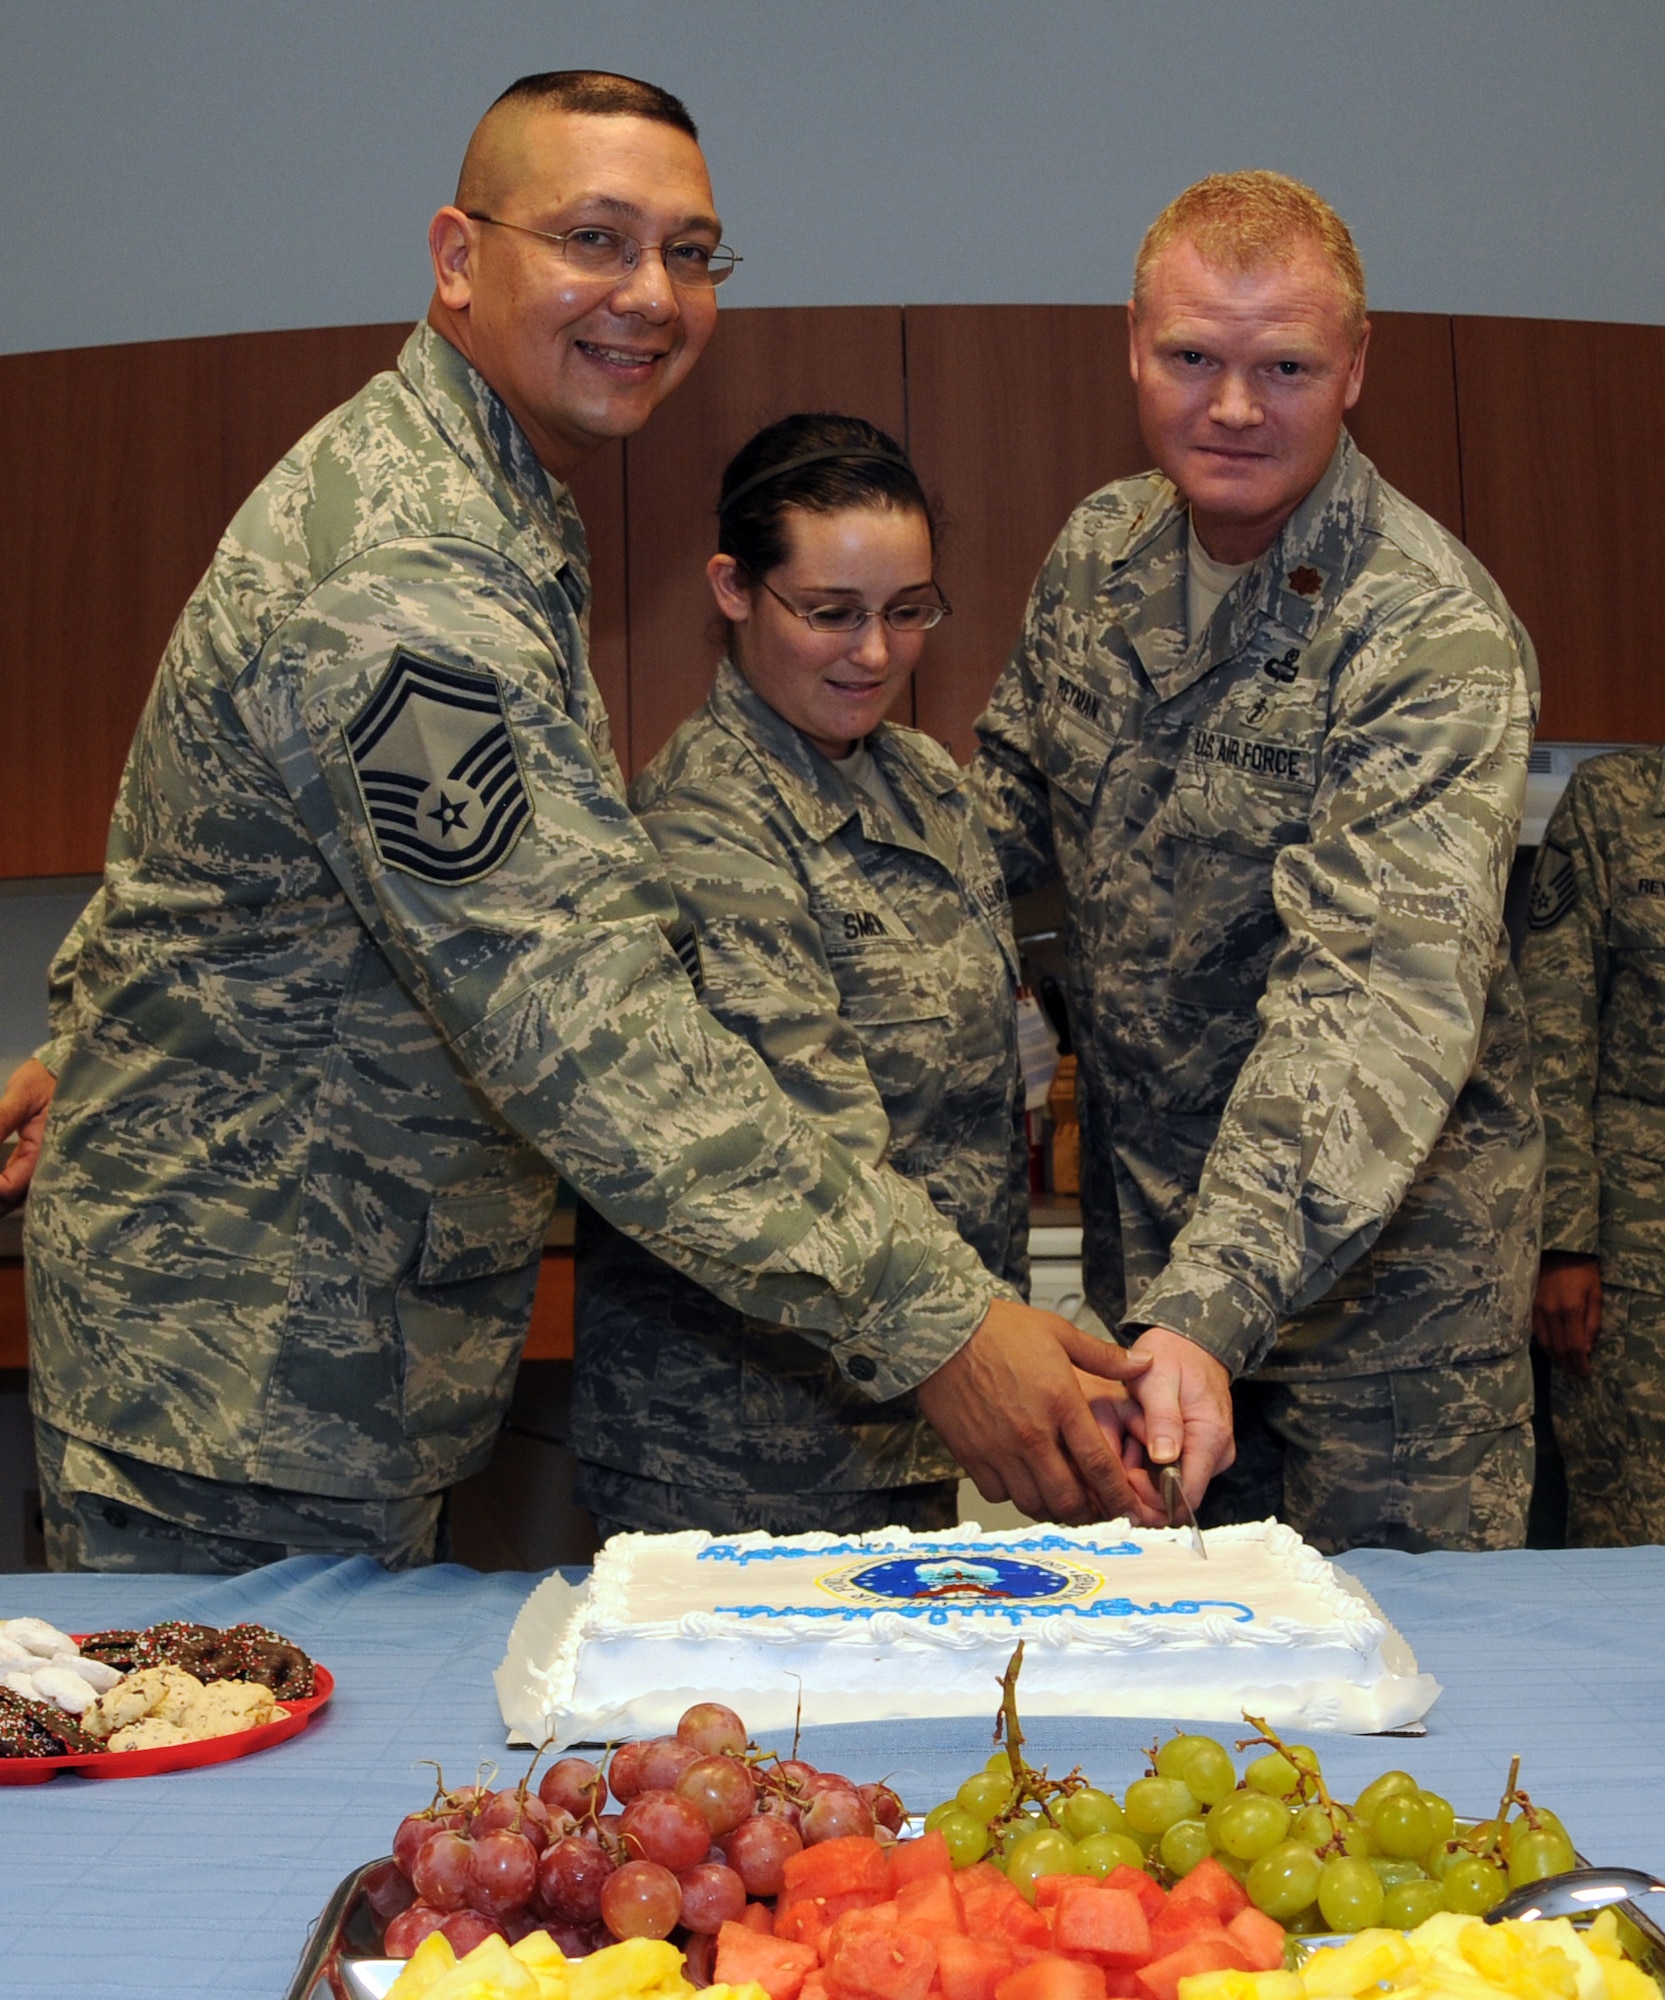 ANDERSEN AIR FORCE BASE, Guam - Senior Master Sgt. Leonardo Castro (left), Staff Sgt. Rebecca Smen (center), and Maj. Bradley Reyman (right), 36th Medical Operations Squadron physical therapy staff, pose while cutting a cake to celebrate the Health and Wellness Center's new physical therapy clinic grand opening Dec. 11.  (U.S. Air Force photo by Senior Airman Jonathan Hart)